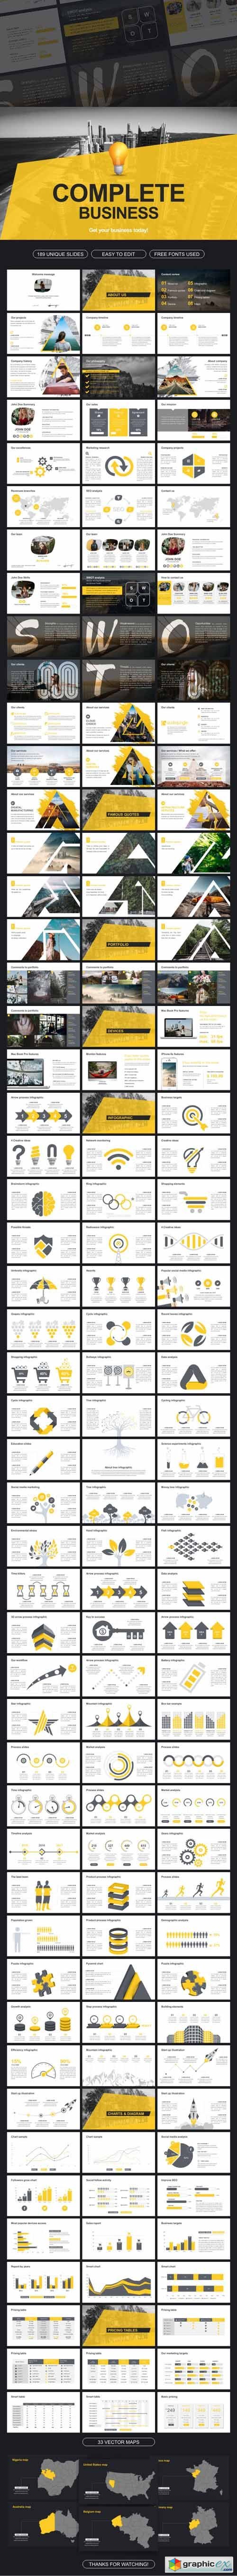 Complete Business Powerpoint